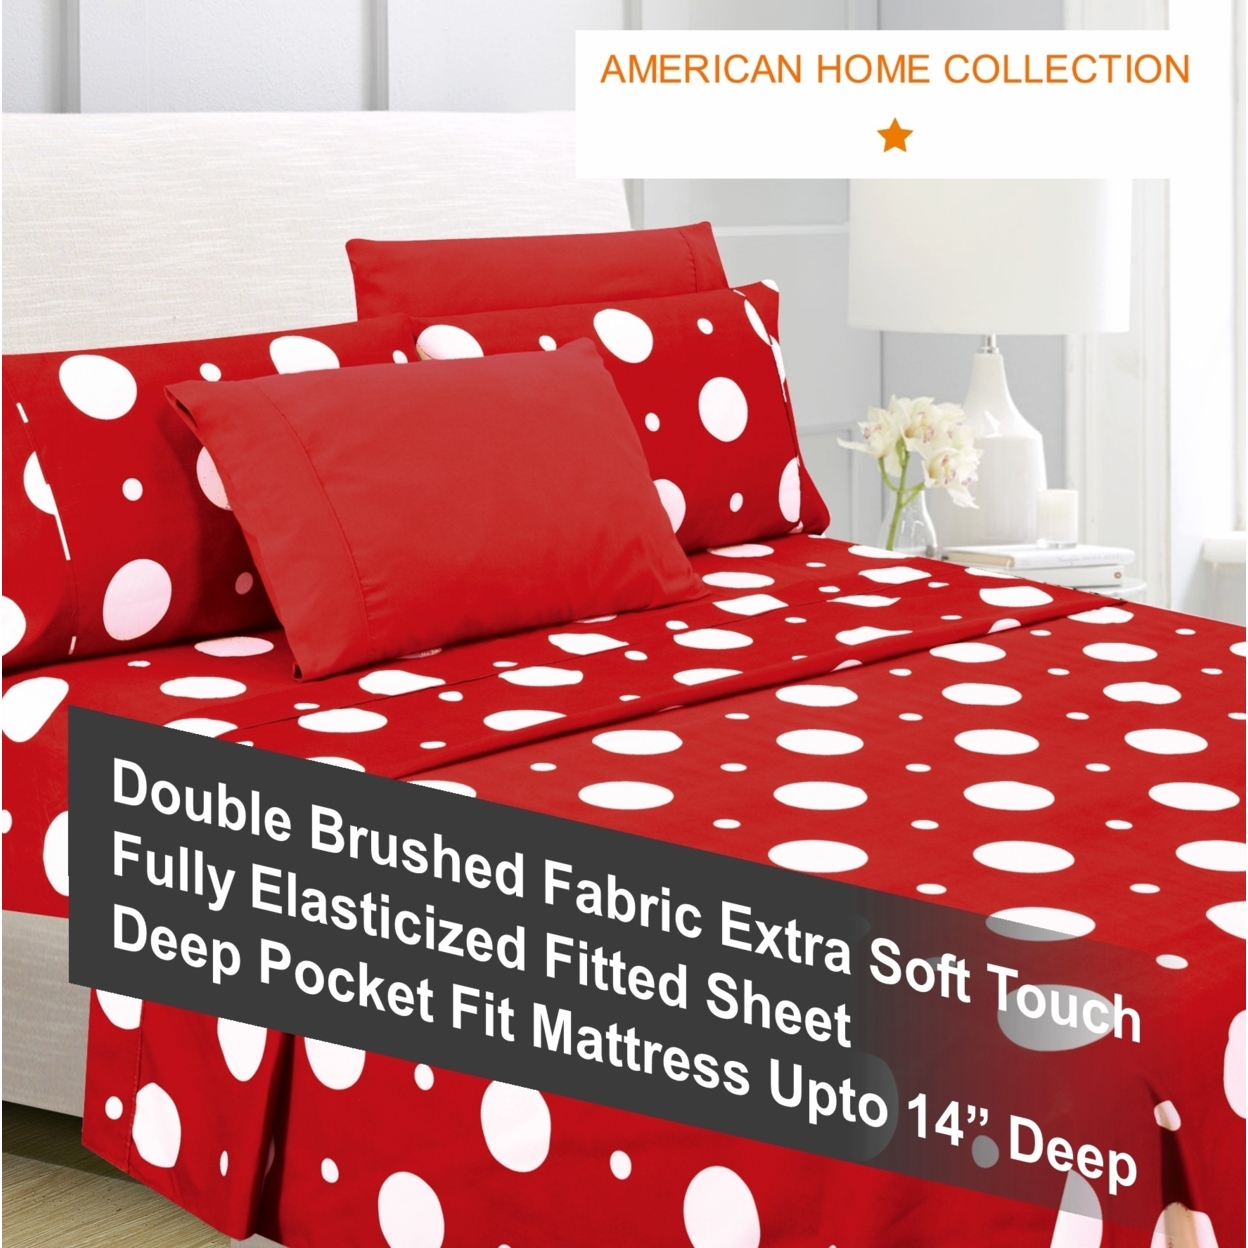 American Home Collection Ultra Soft 4-6 Piece Polka Dot Printed Bed Sheet Set - Full, Blue